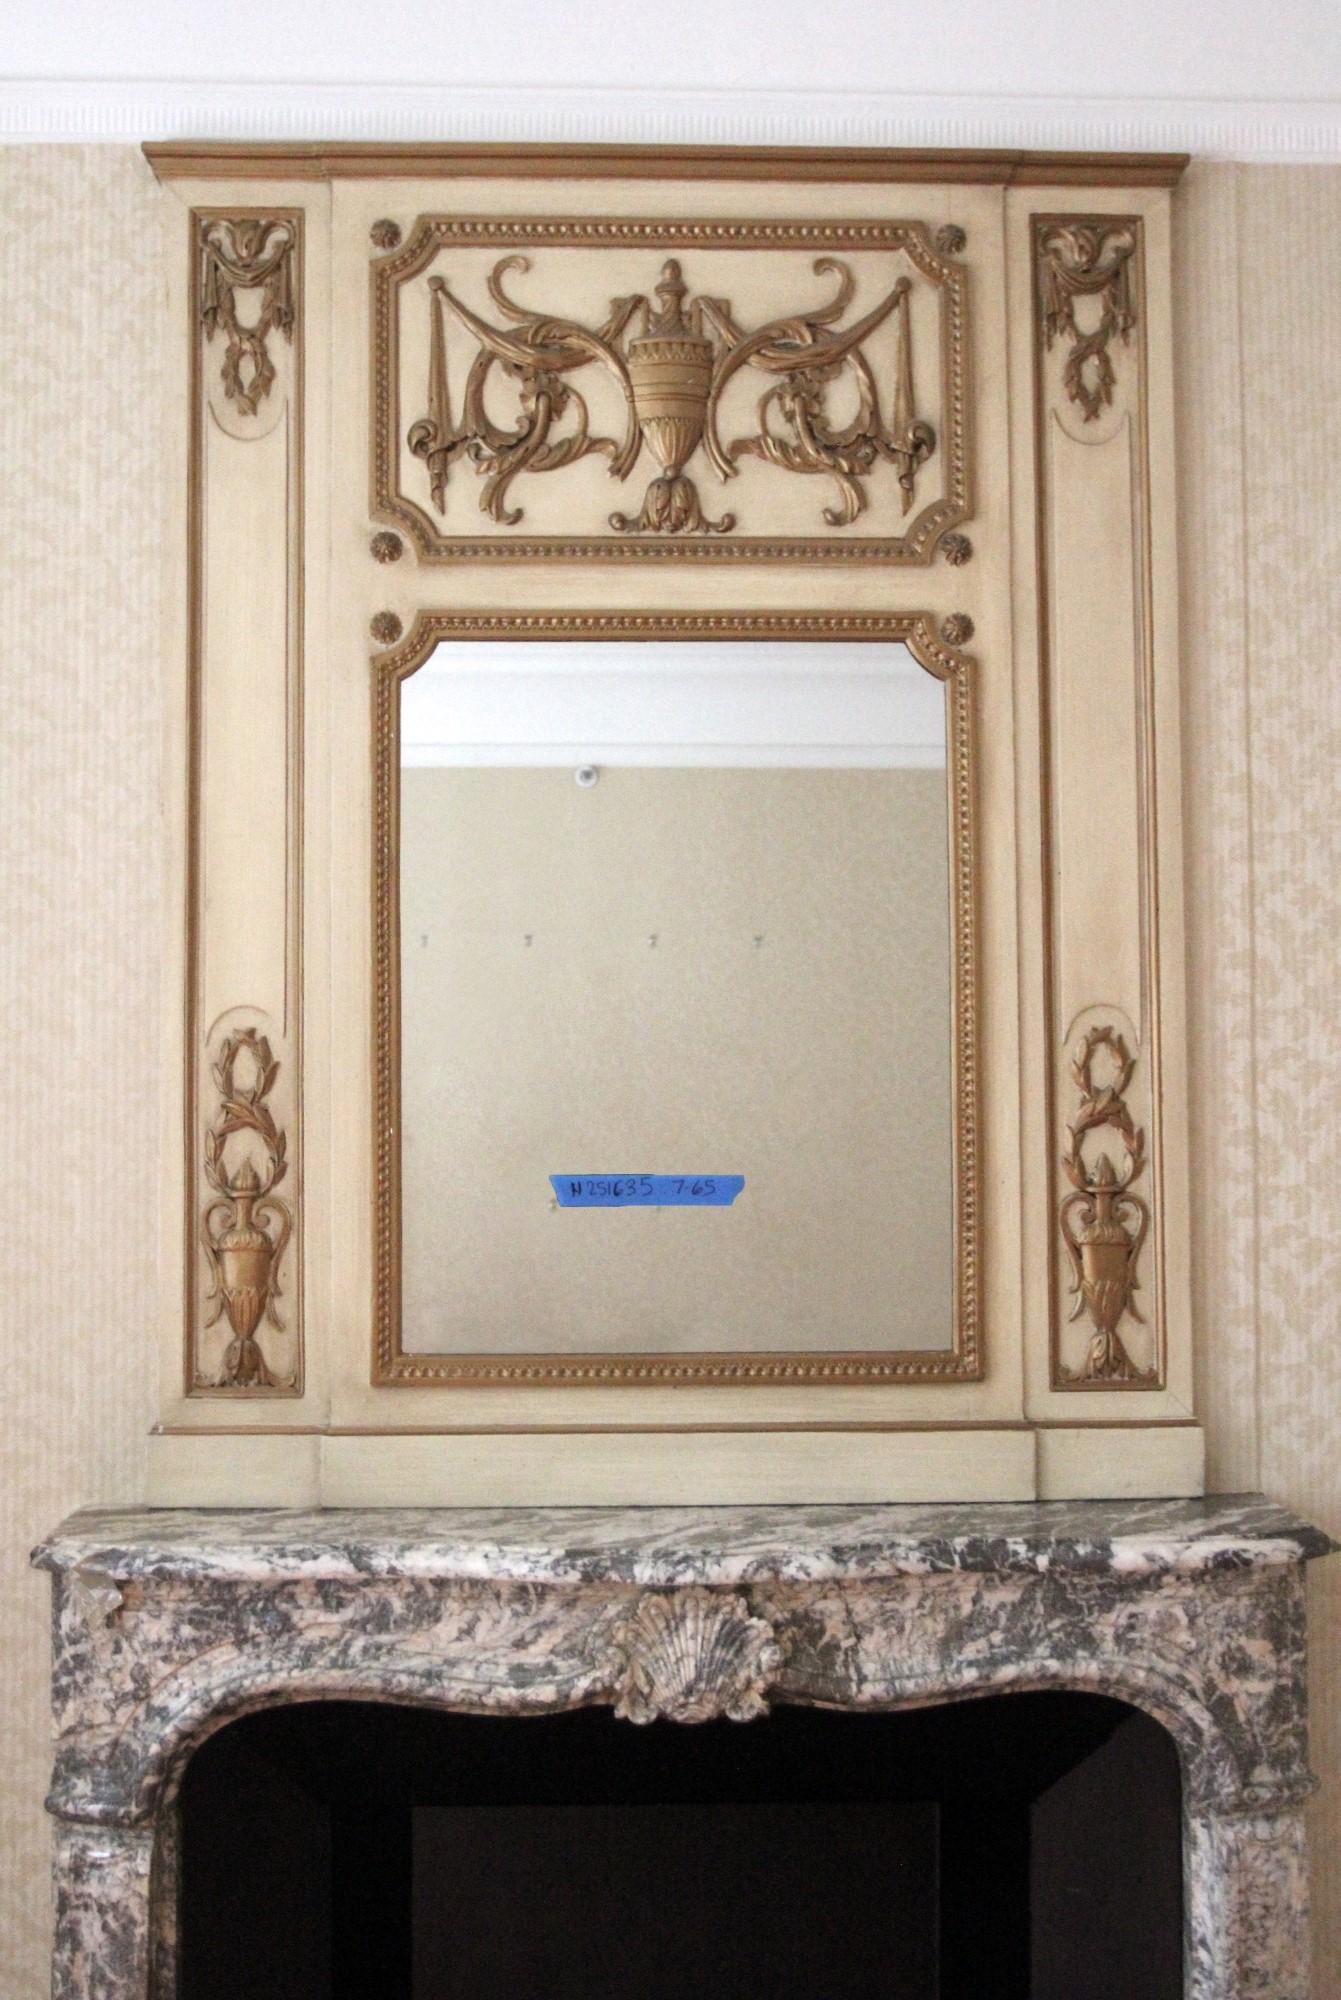 From the NYC Waldorf Astoria Hotel, this tan wood over mantel mirror has carved gold brown and gesso details including a large urn in the top center. Brought over from France this over mantel was installed in Suite 765 and dates from the 1931